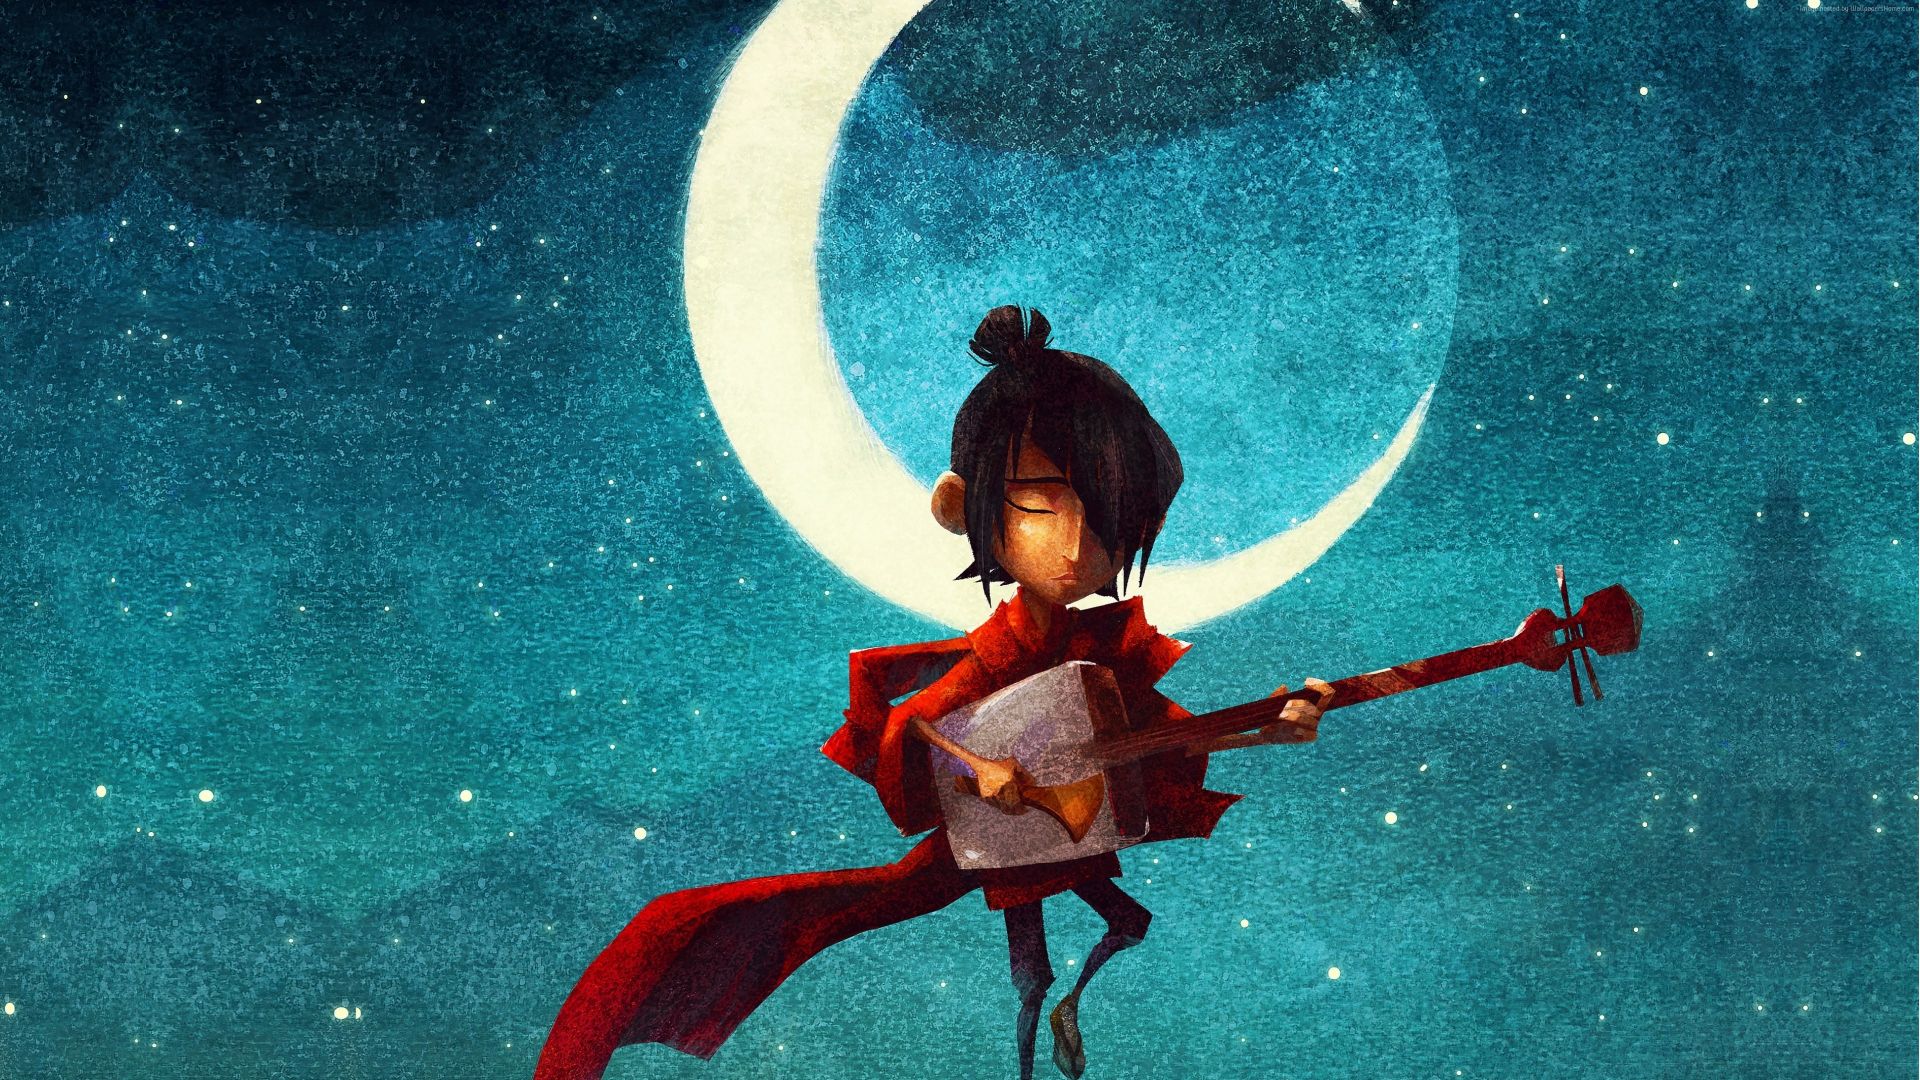 Wallpaper 2016 Kubo and the Two Strings movie